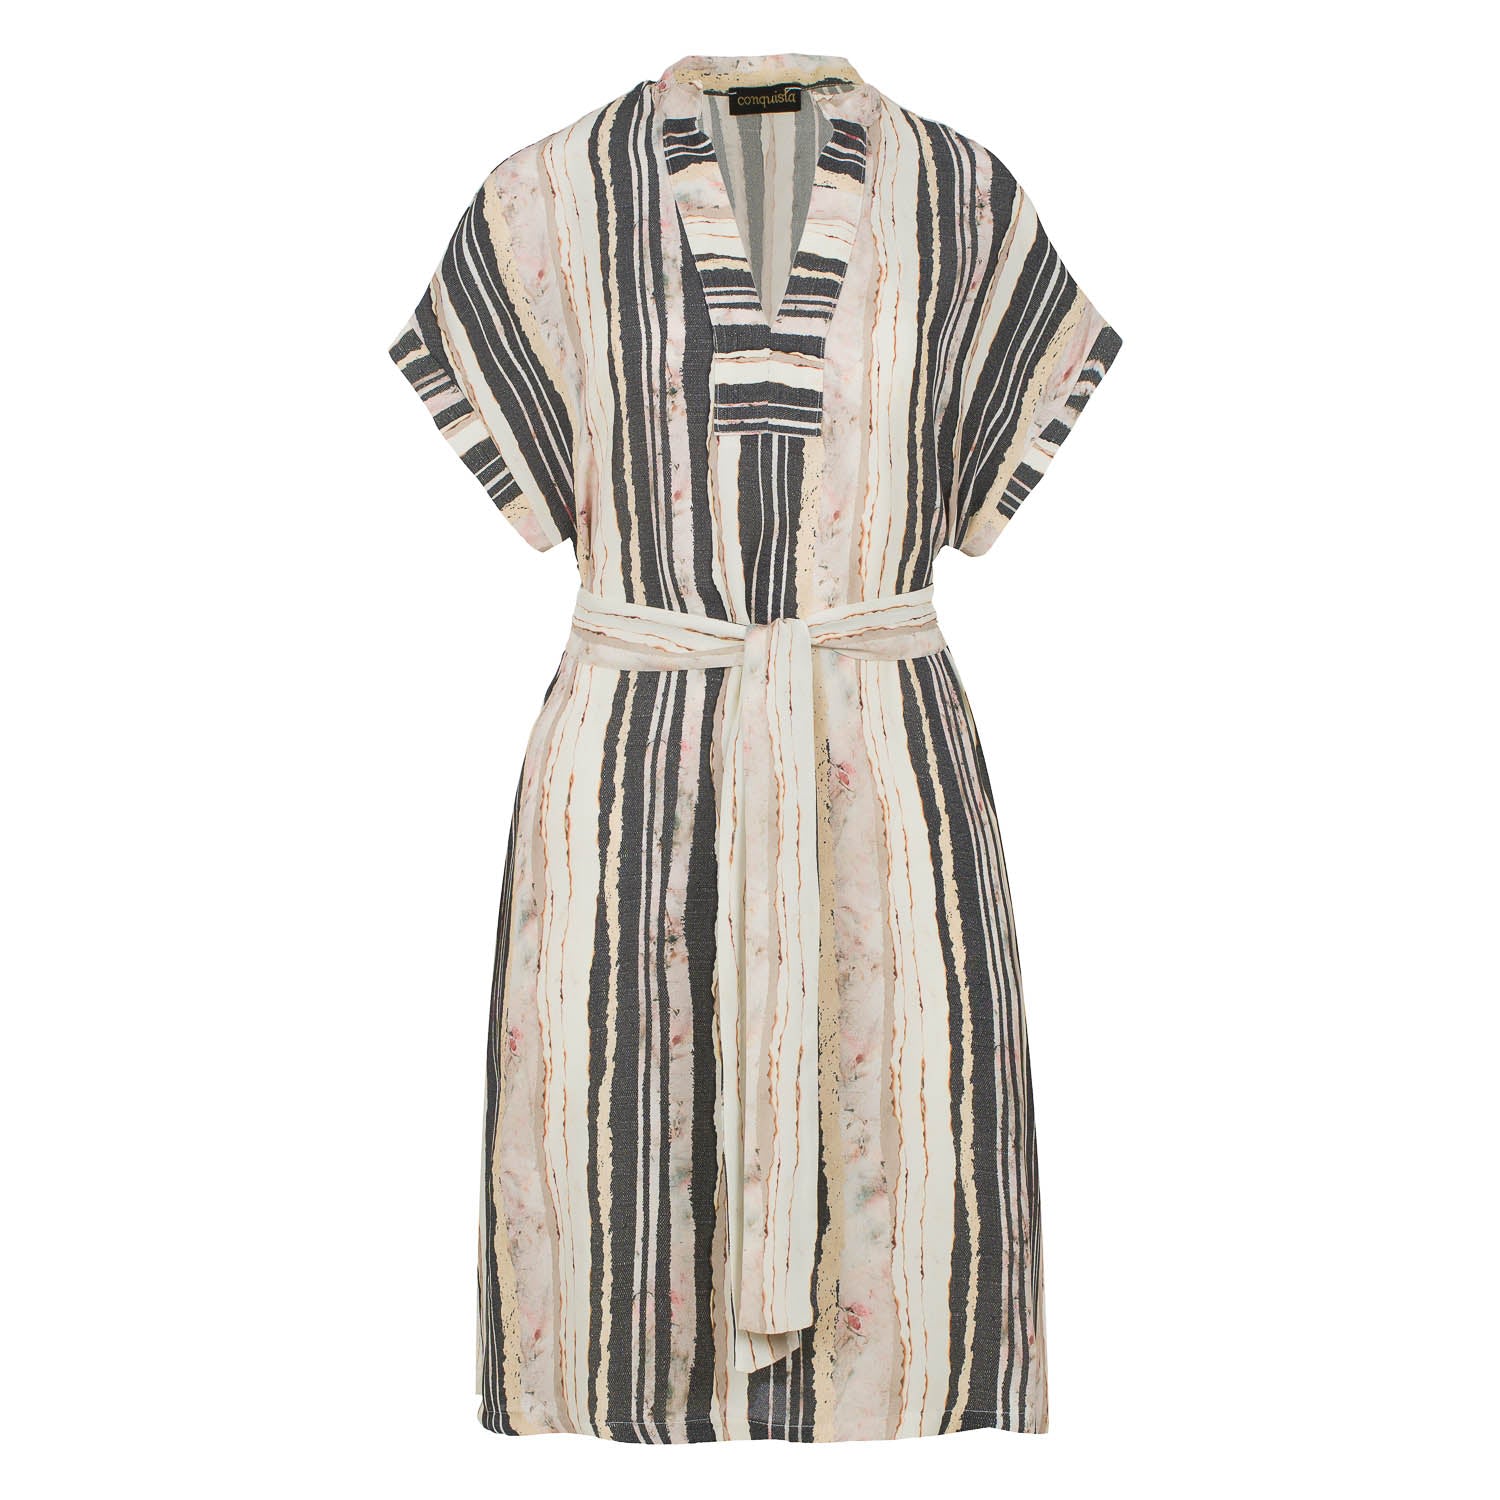 Women’s Stripe Print Sleeveless Dress With Side Slits Large Conquista